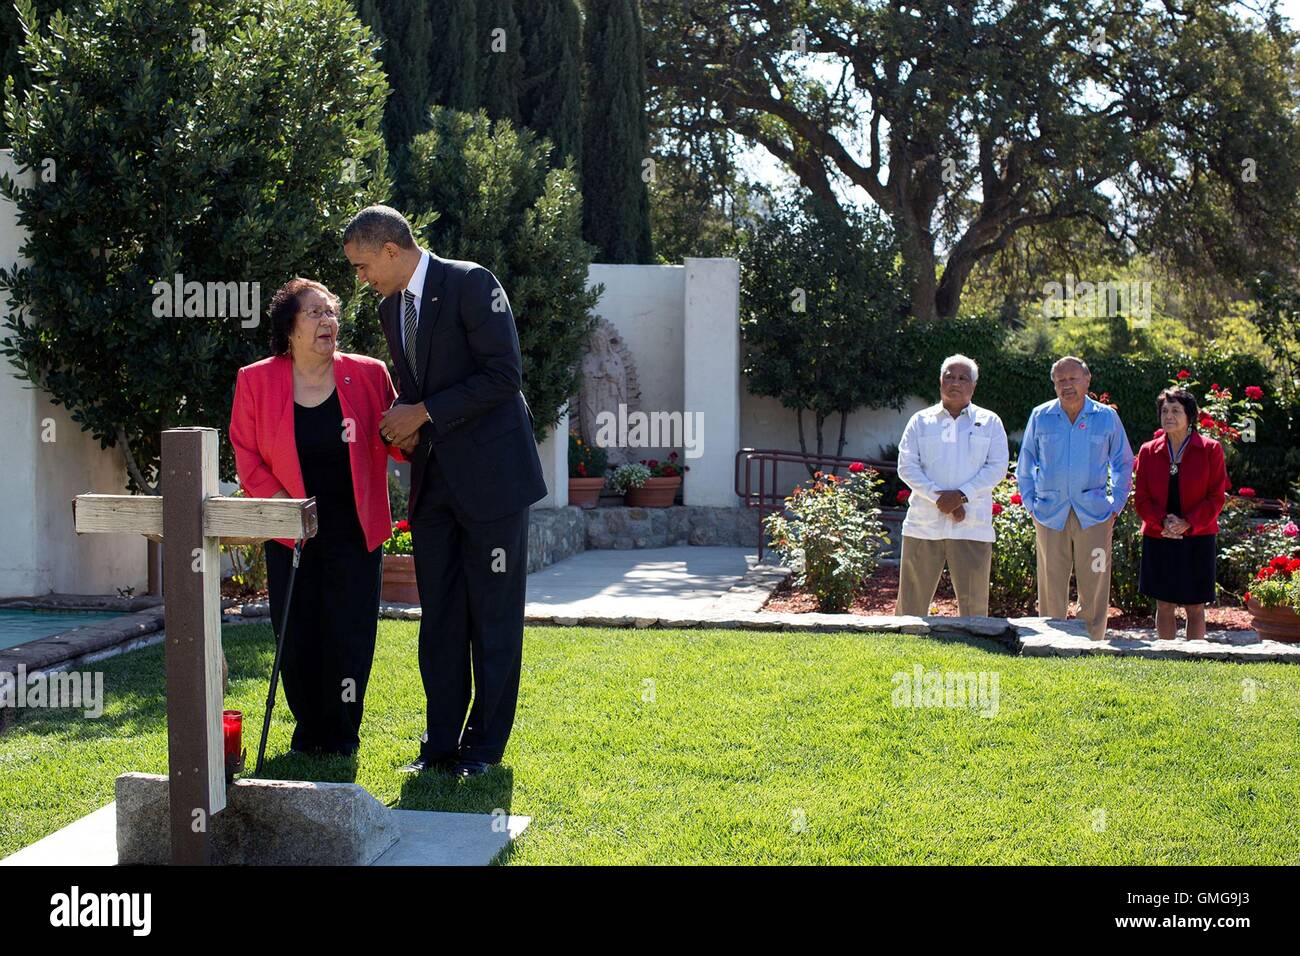 U.S President Barack Obama visits the Cesar E. Chavez National Monument with Helen Chavez, wife of the iconic labor leader October 8, 2012 in Keene, California. Stock Photo